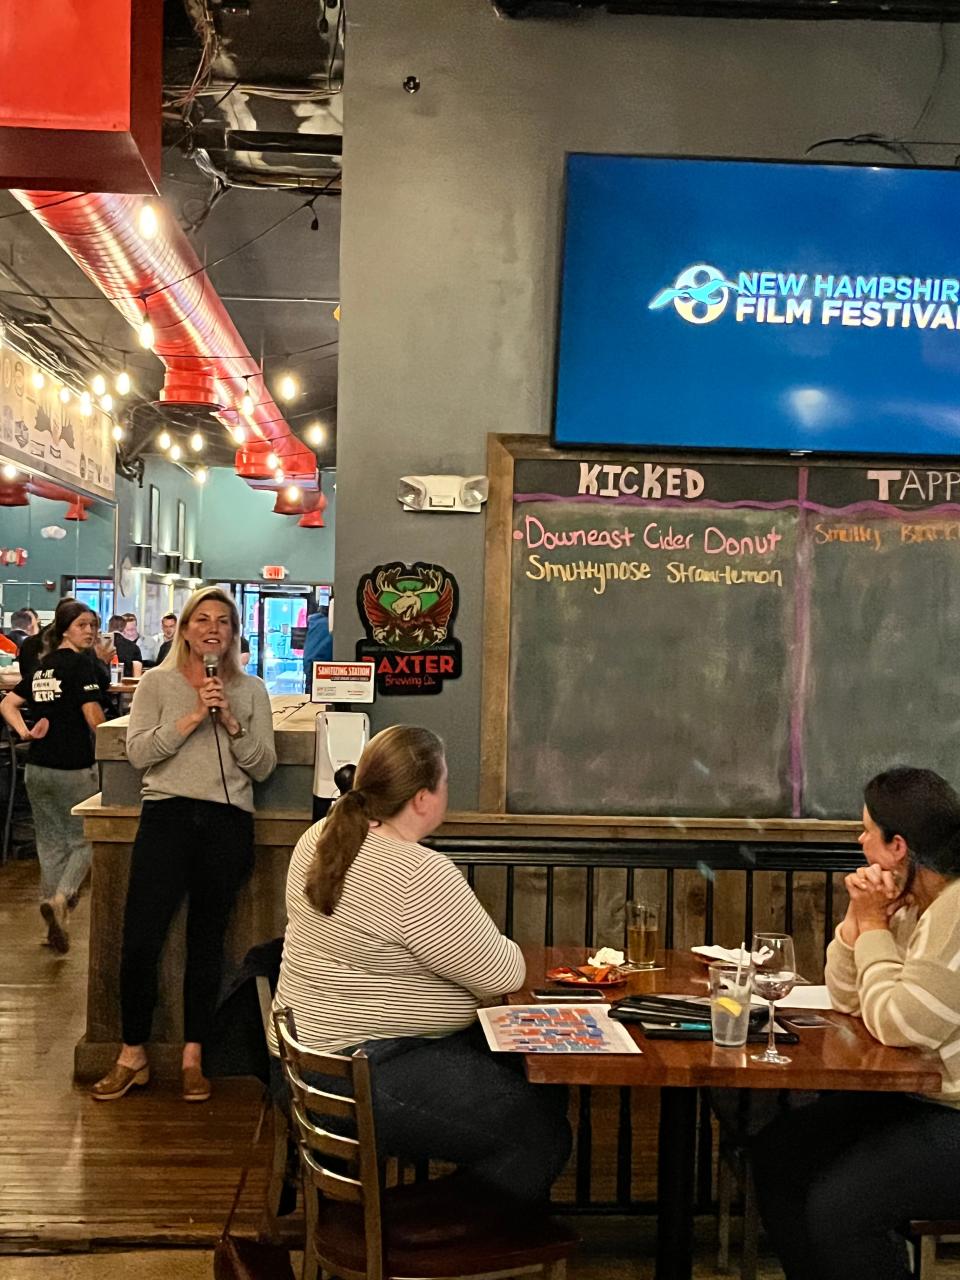 The New Hampshire Film Festival held a party at the Thirsty Moose in Portsmouth to debut the film trailer for this year's festival's films. Nicole Gregg, NHFF executive director, introduces the trailer created by Seacoast Flash!.